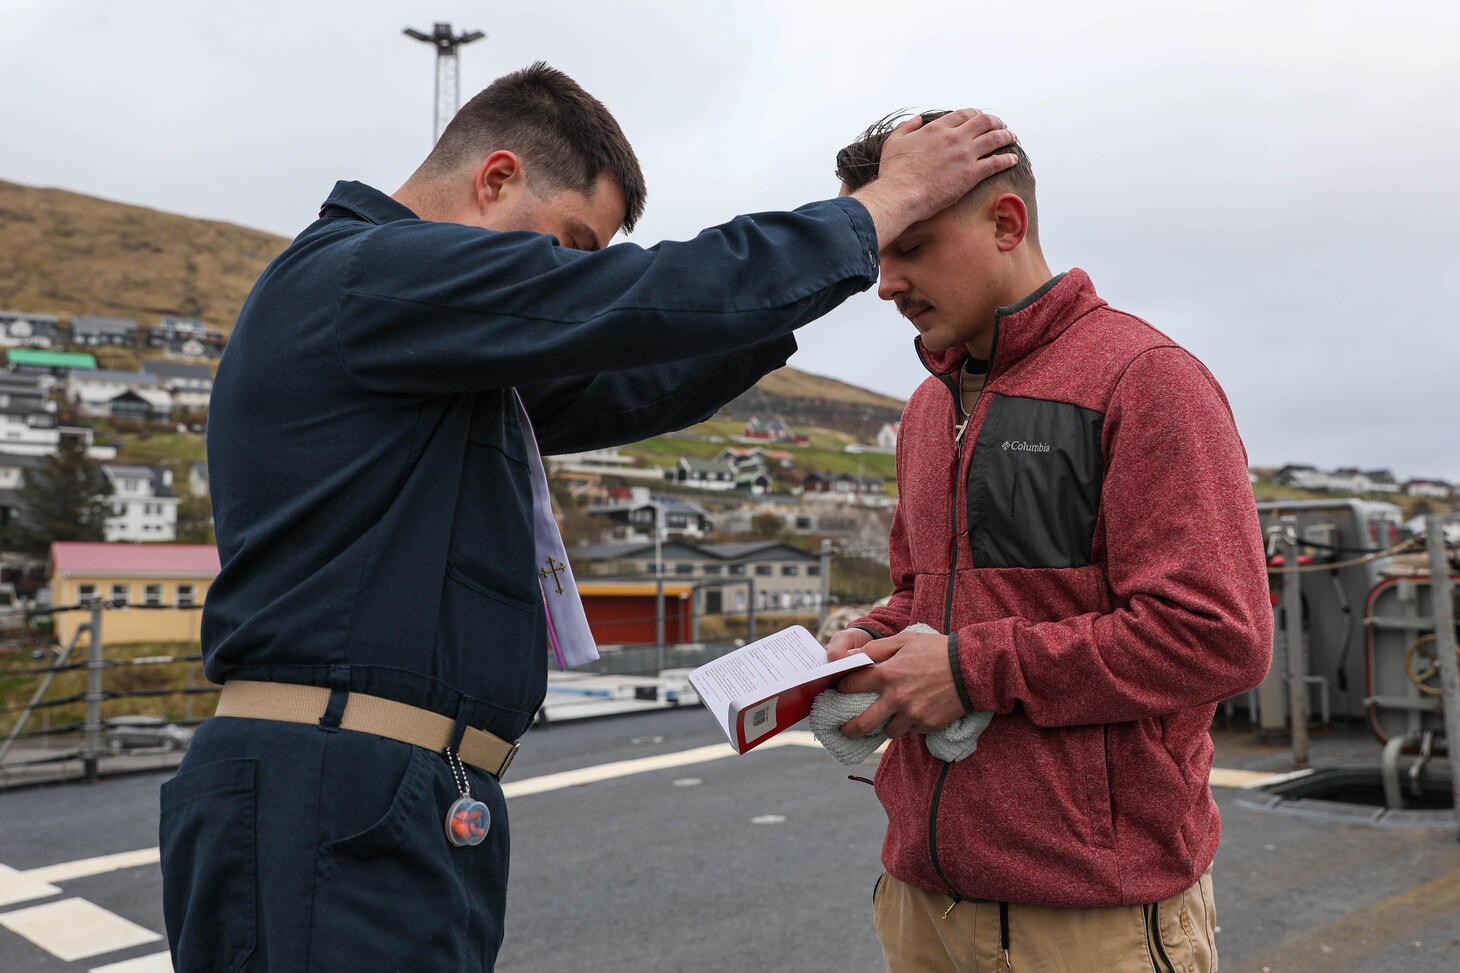 Hospital Corpsman 3rd Class Jonathan Scripp, right, is baptised by Lt. Joshua Johnson, the Chaplain aboard the Arleigh Burke-class guided-missile destroyer USS Ross (DDG 71), in a reaffirmation of baptism ceremony using the ship’s bell while in port in the Faroe Islands, May 15, 2021.